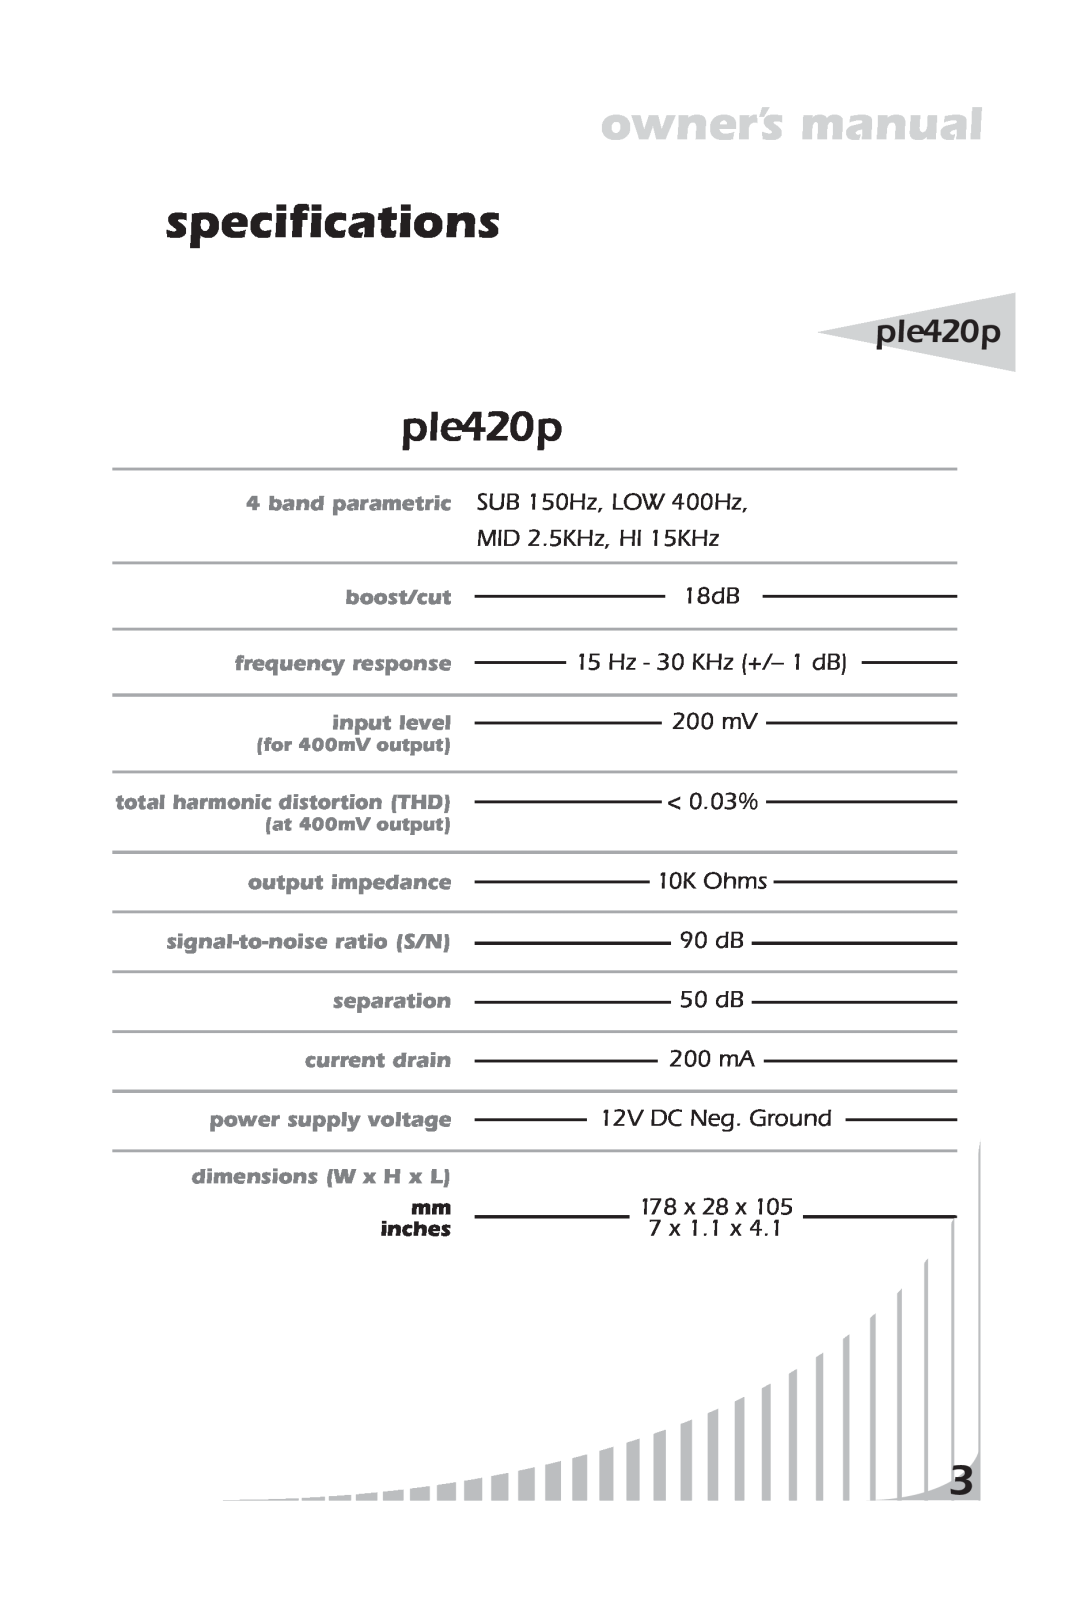 PYLE Audio ple420p owner manual specifications 